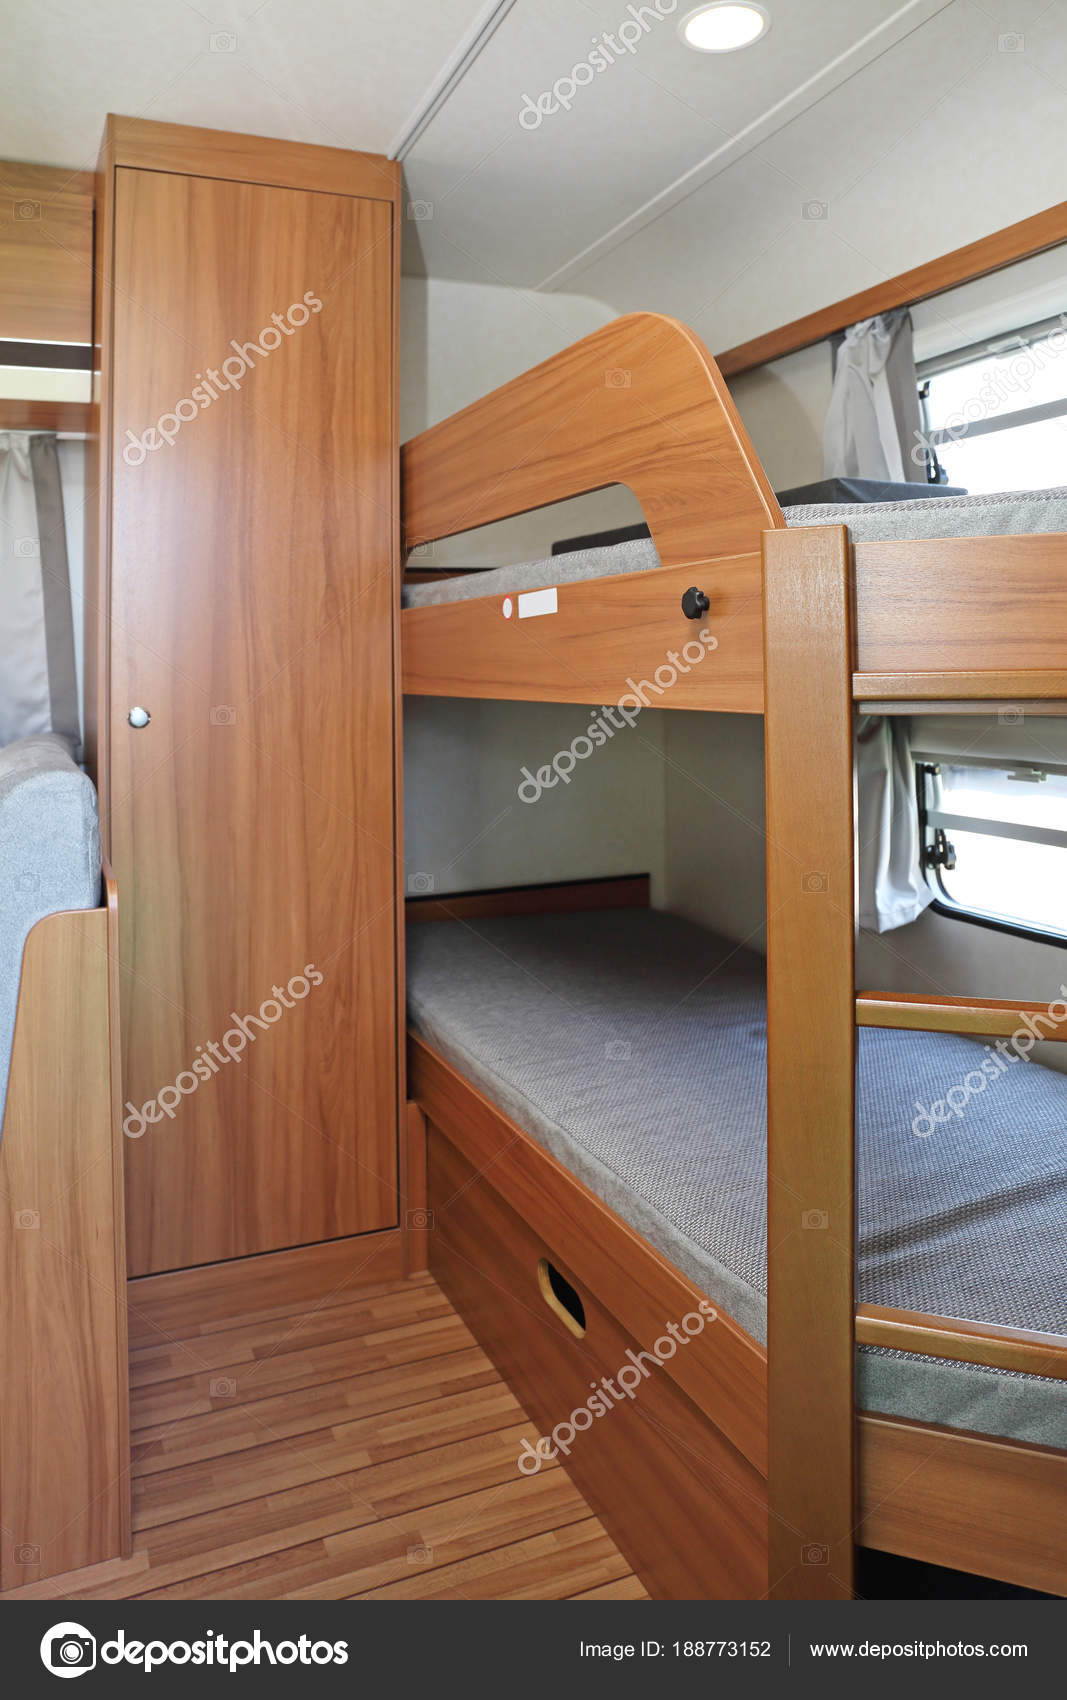 bunk beds in stock